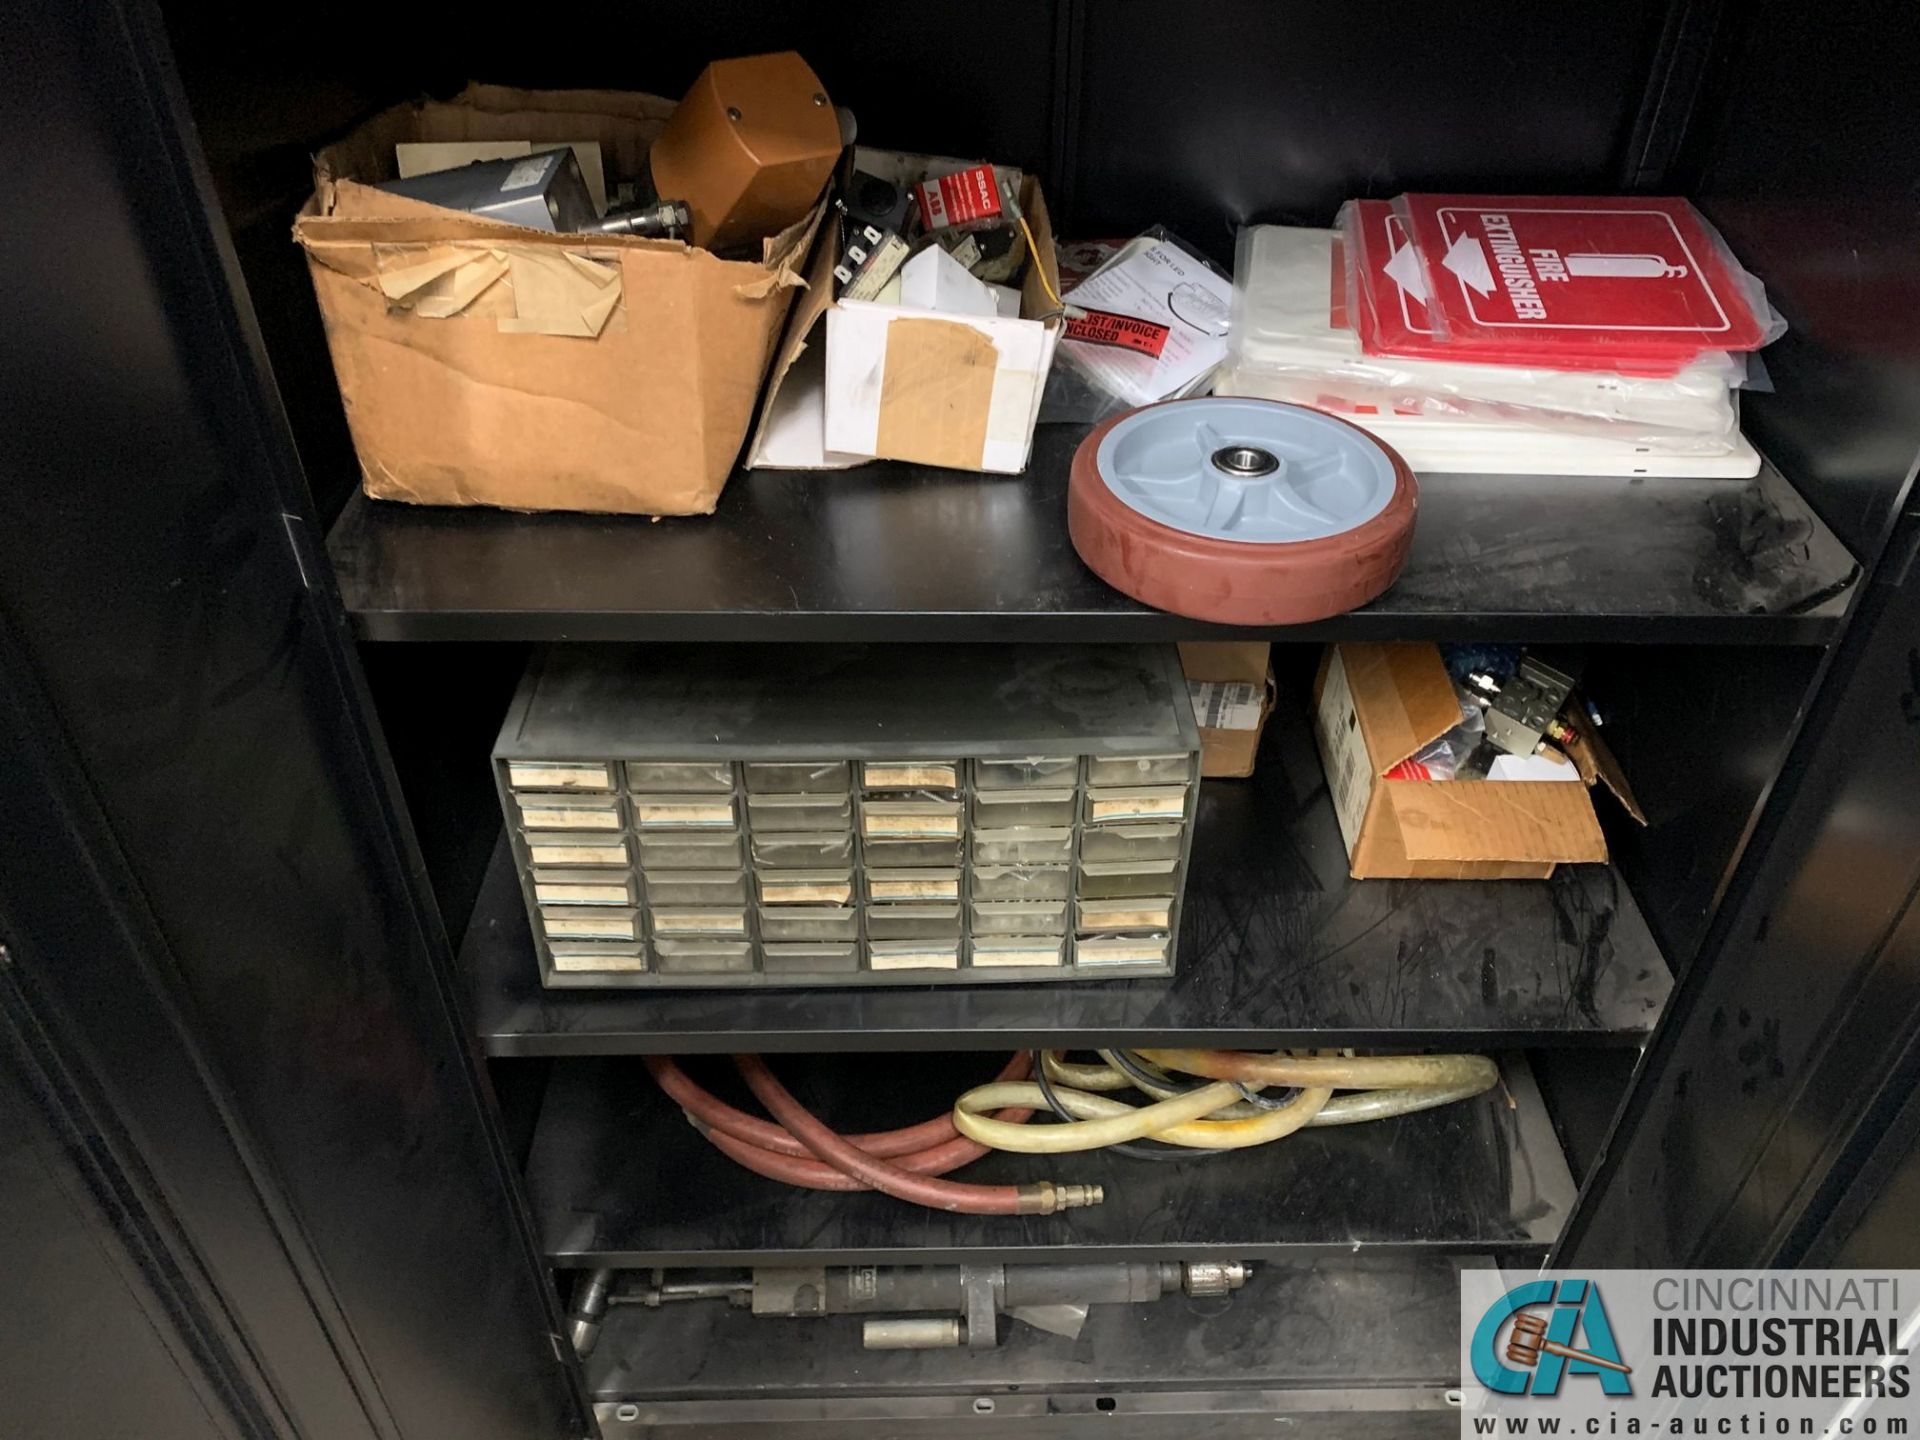 (LOT) (2) CABINETS WITH MAINTENANCE PARTS, ELECTRIC PLUGS, AIR CYLINDERS, SIGNS - Image 6 of 6